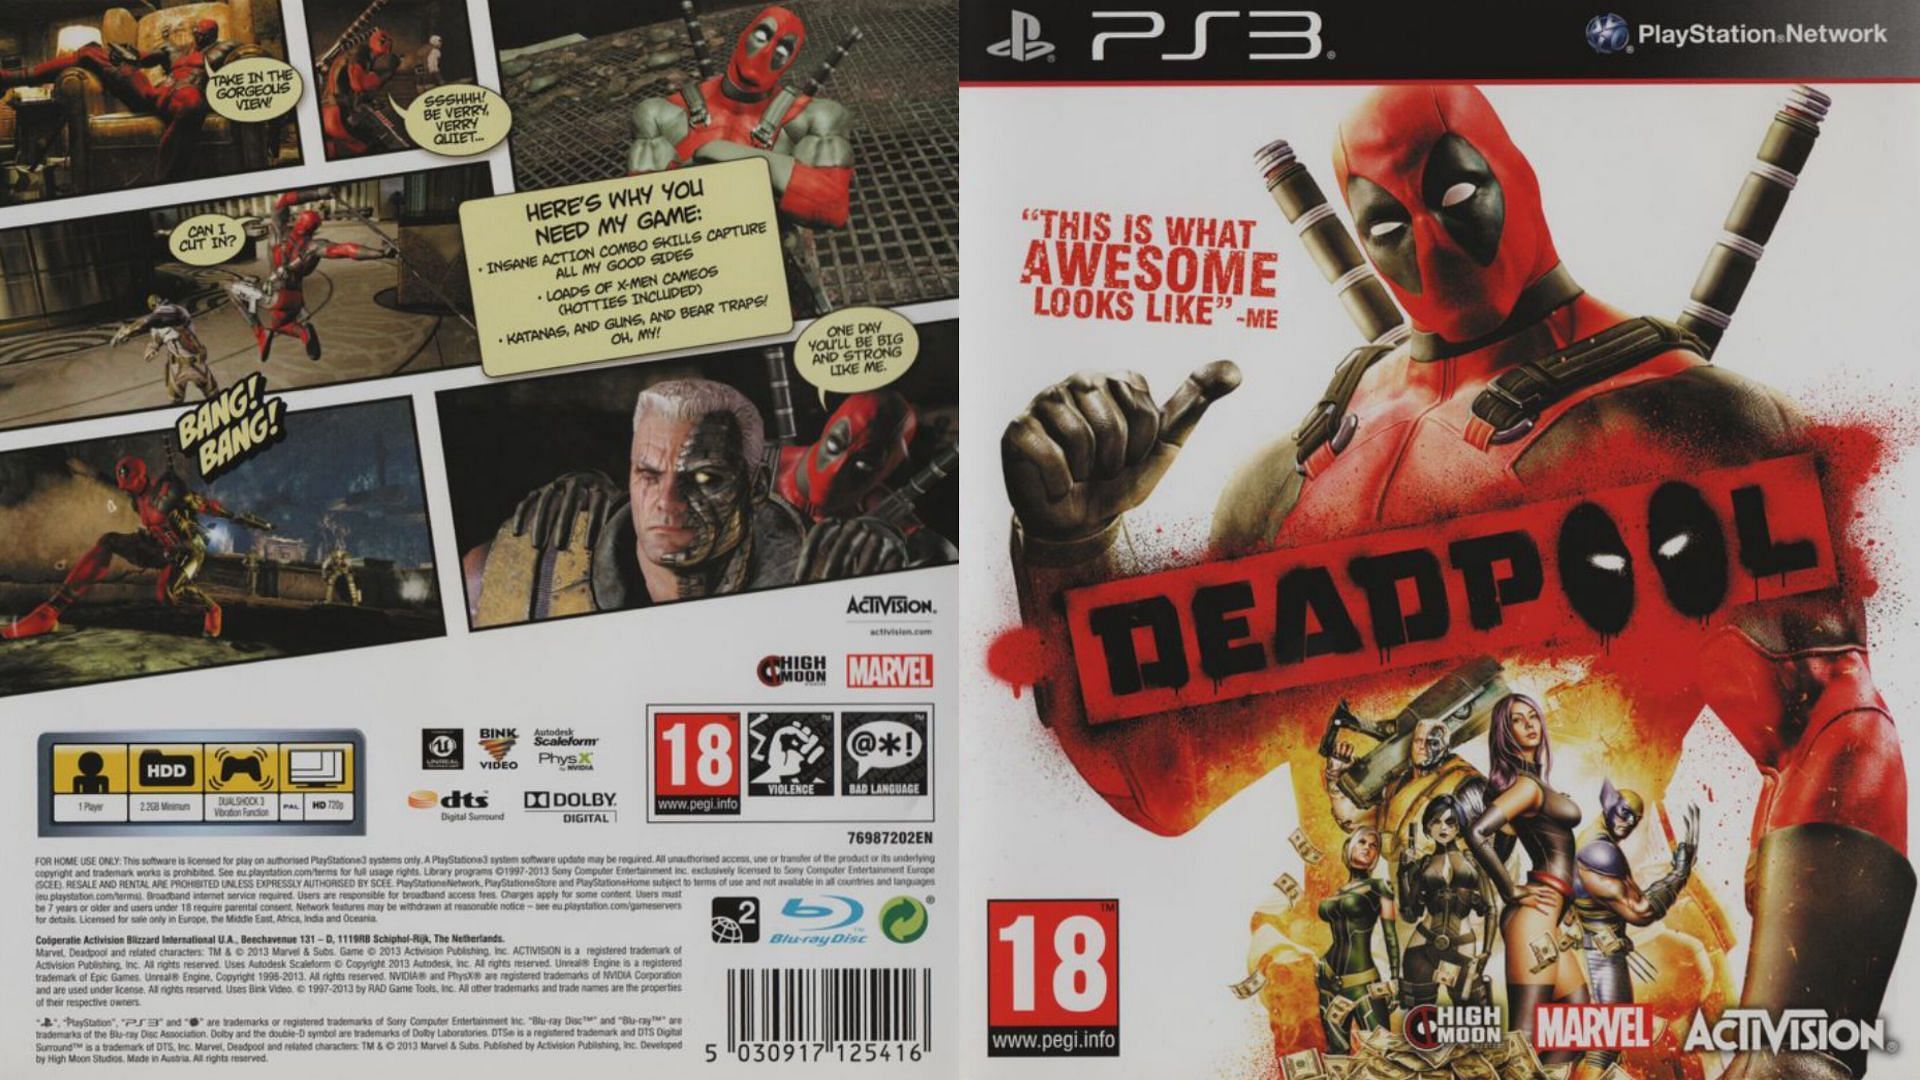 Deadpool was removed from online storefronts after the license expired (Image via Activision)